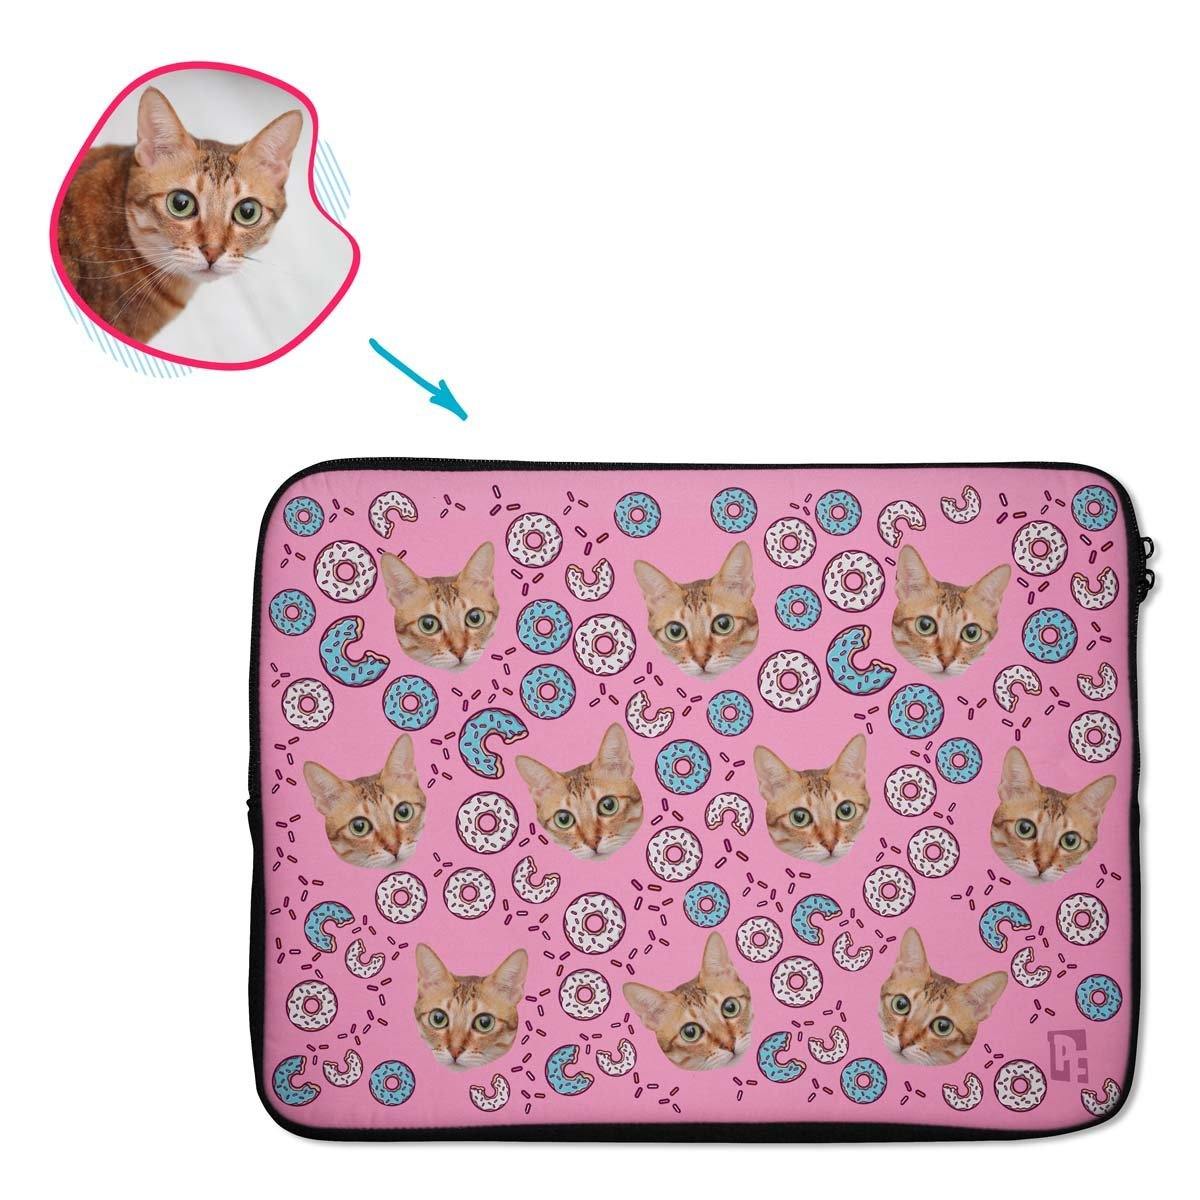 pink Donuts laptop sleeve personalized with photo of face printed on them